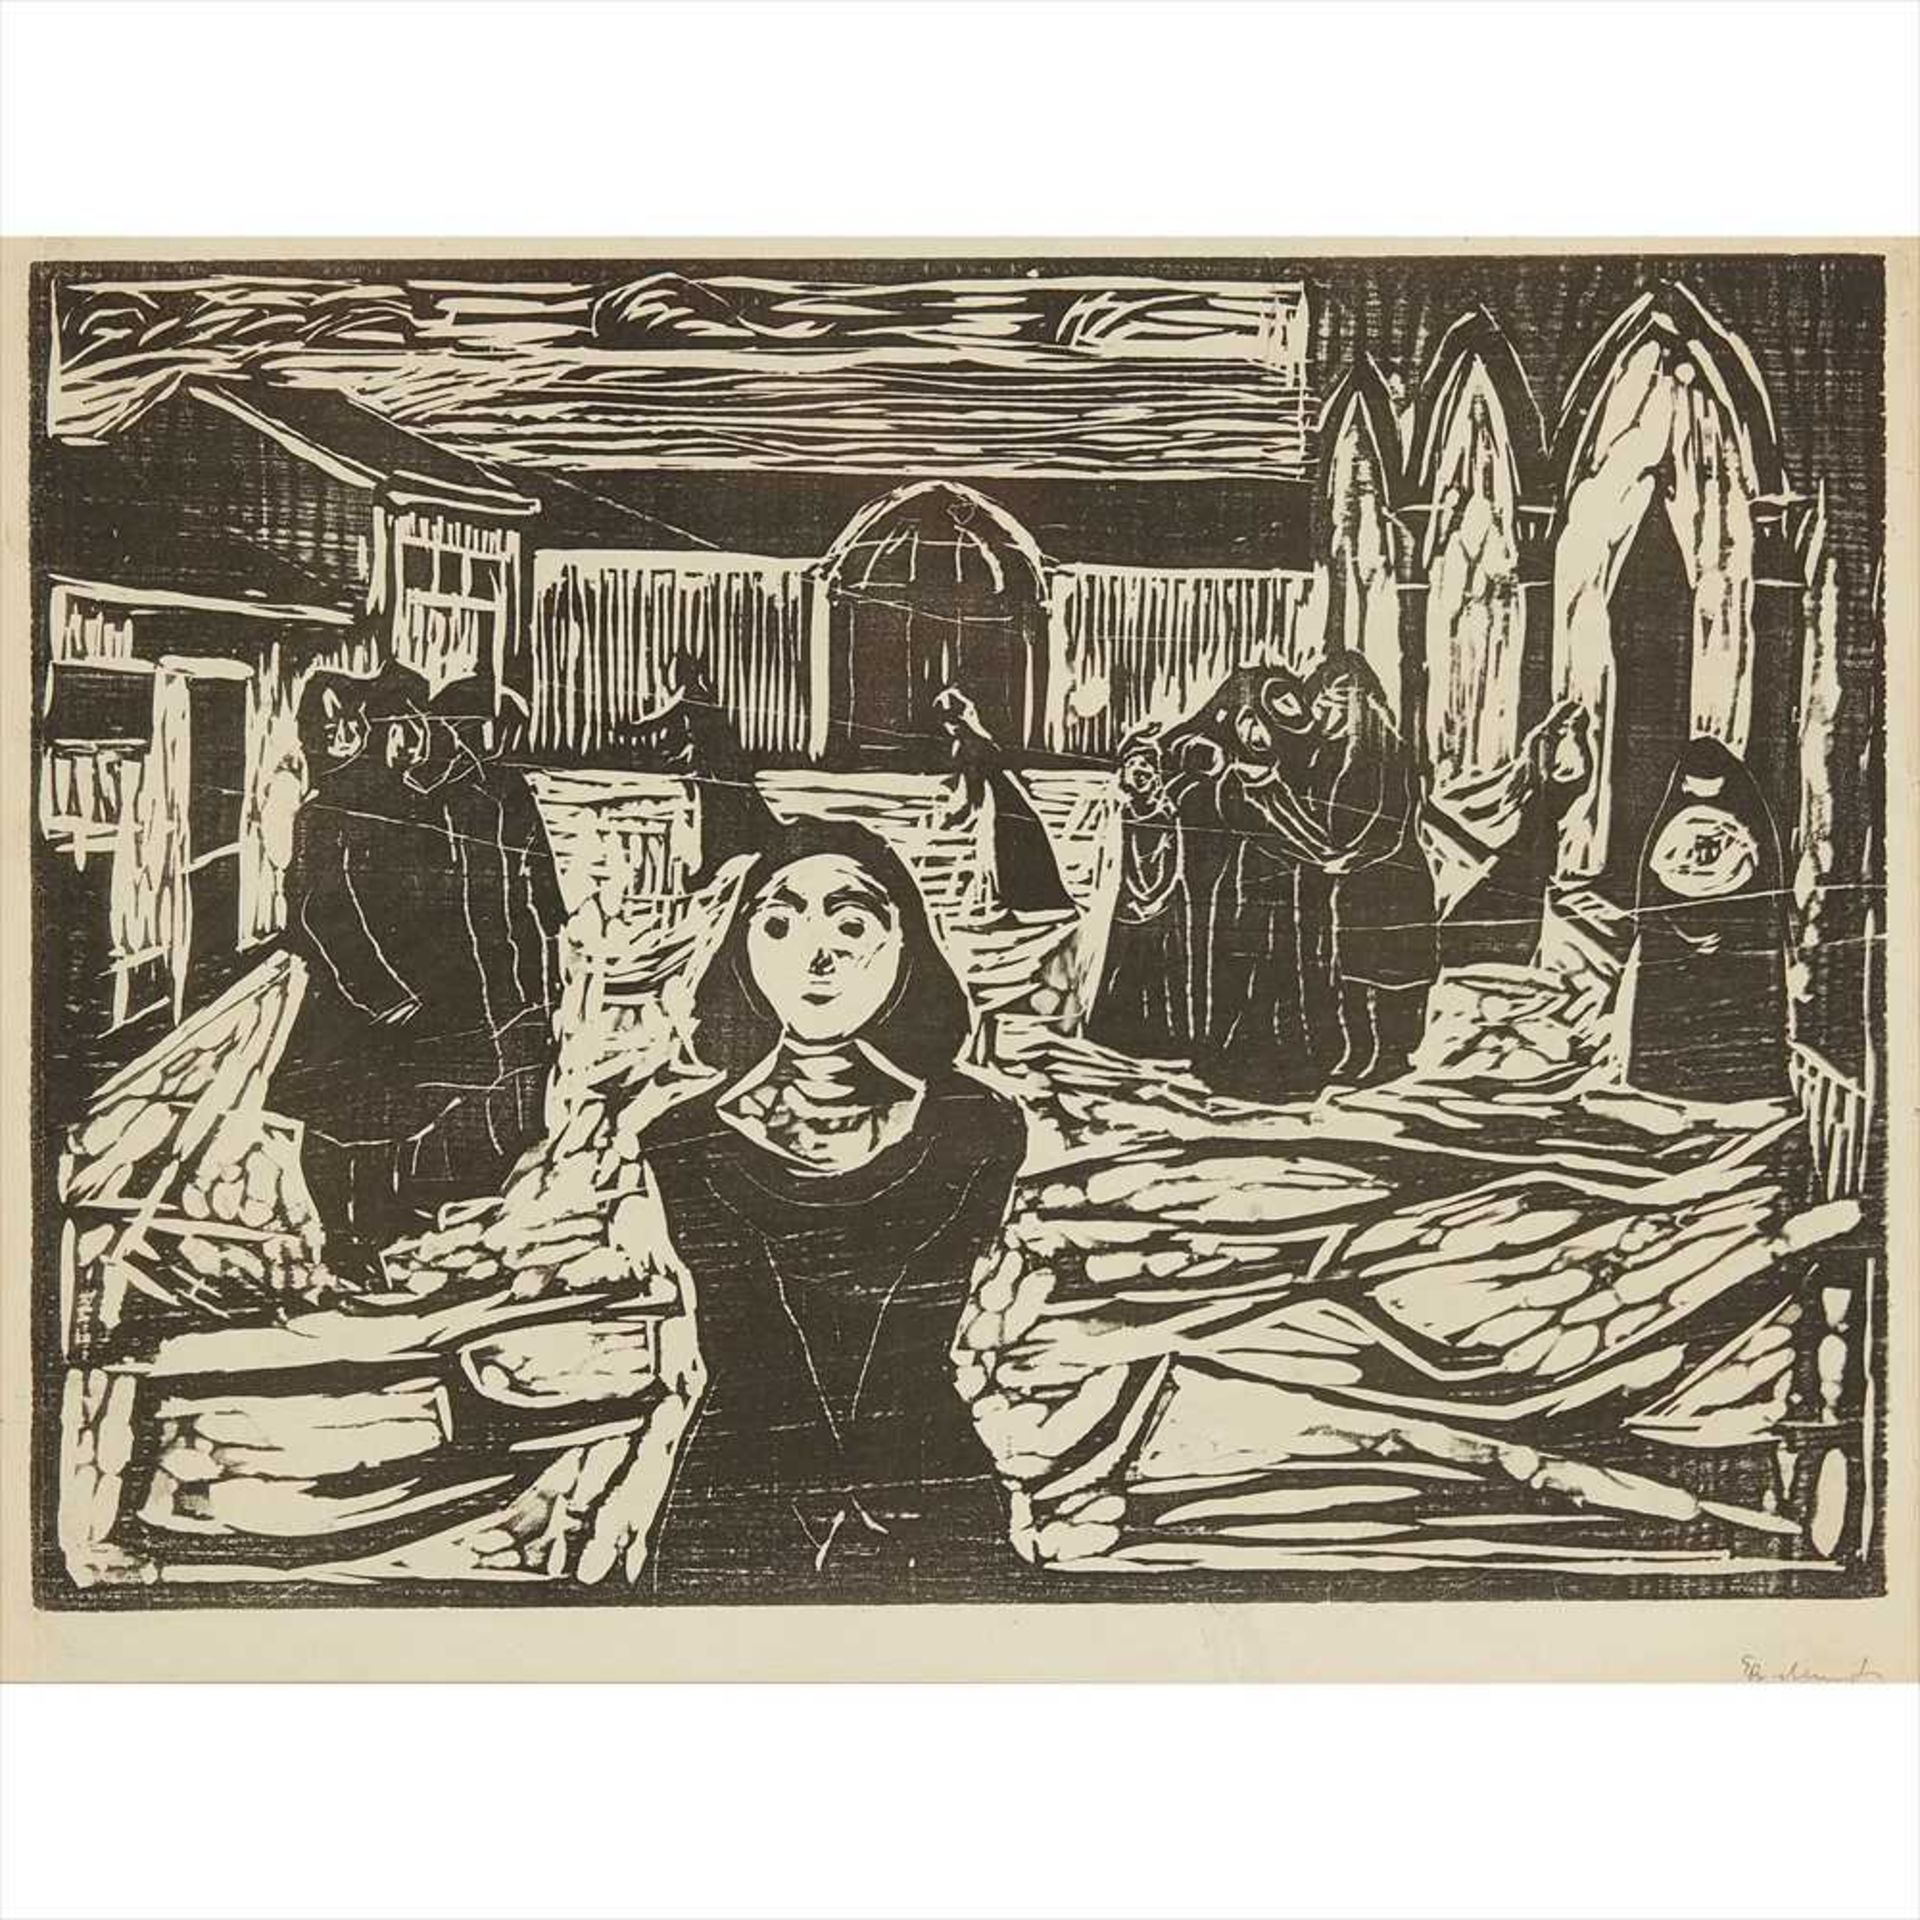 EDVARD MUNCH (NORWEGIAN 1863-1944), AFTER THE PRETENDERS: THE LAST HOUR Lithographic reproduction